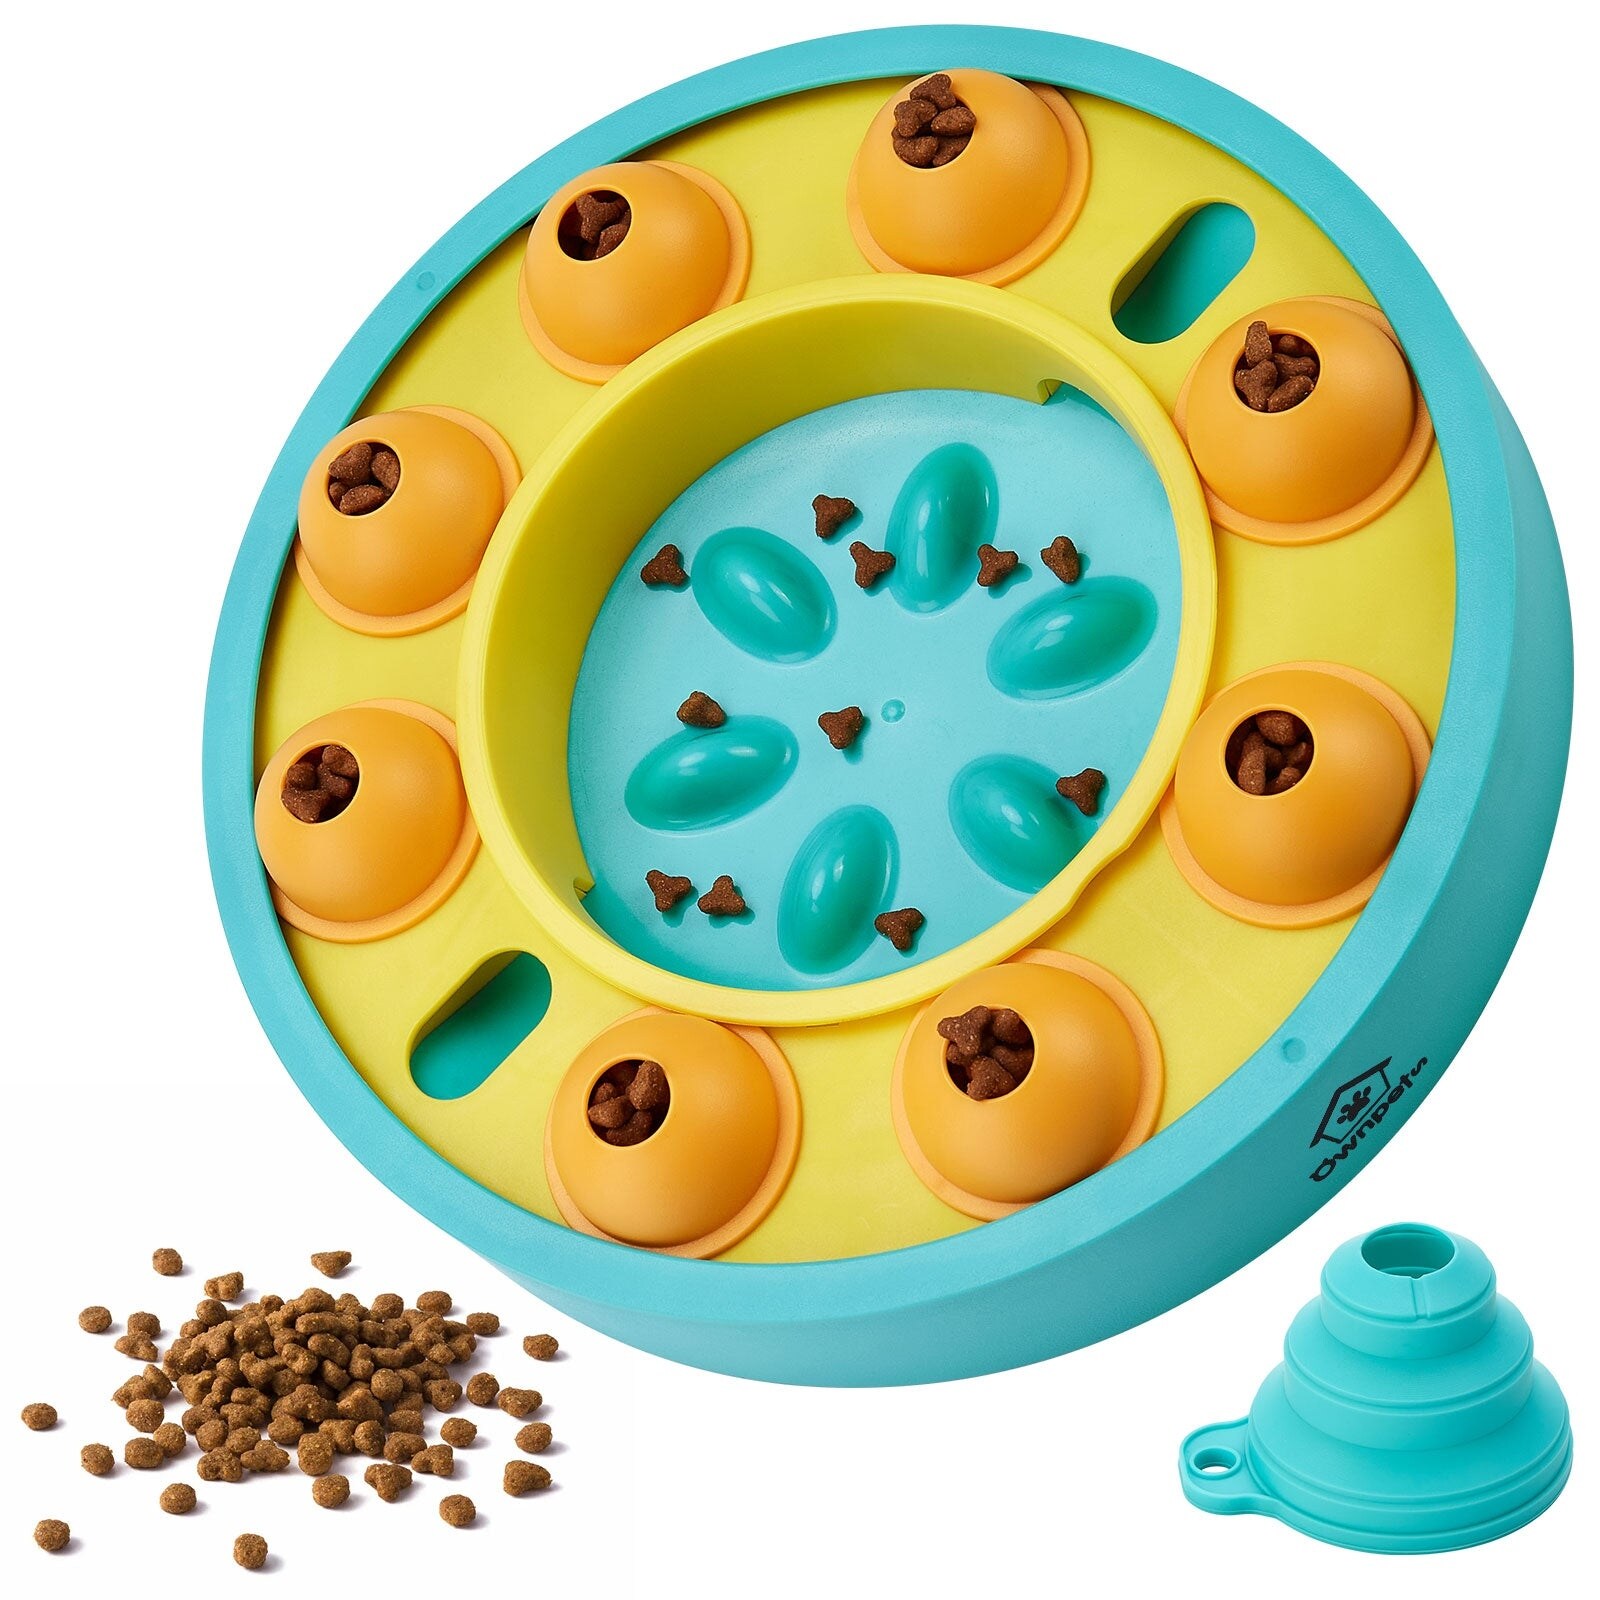 https://ak1.ostkcdn.com/images/products/is/images/direct/92dcf3380cda3361360b2c44dc2dca3ee9e36209/Interactive-Dog-Food-Puzzle-Slow-Feeder-Treat-Dispenser-Puzzle-Toy.jpg